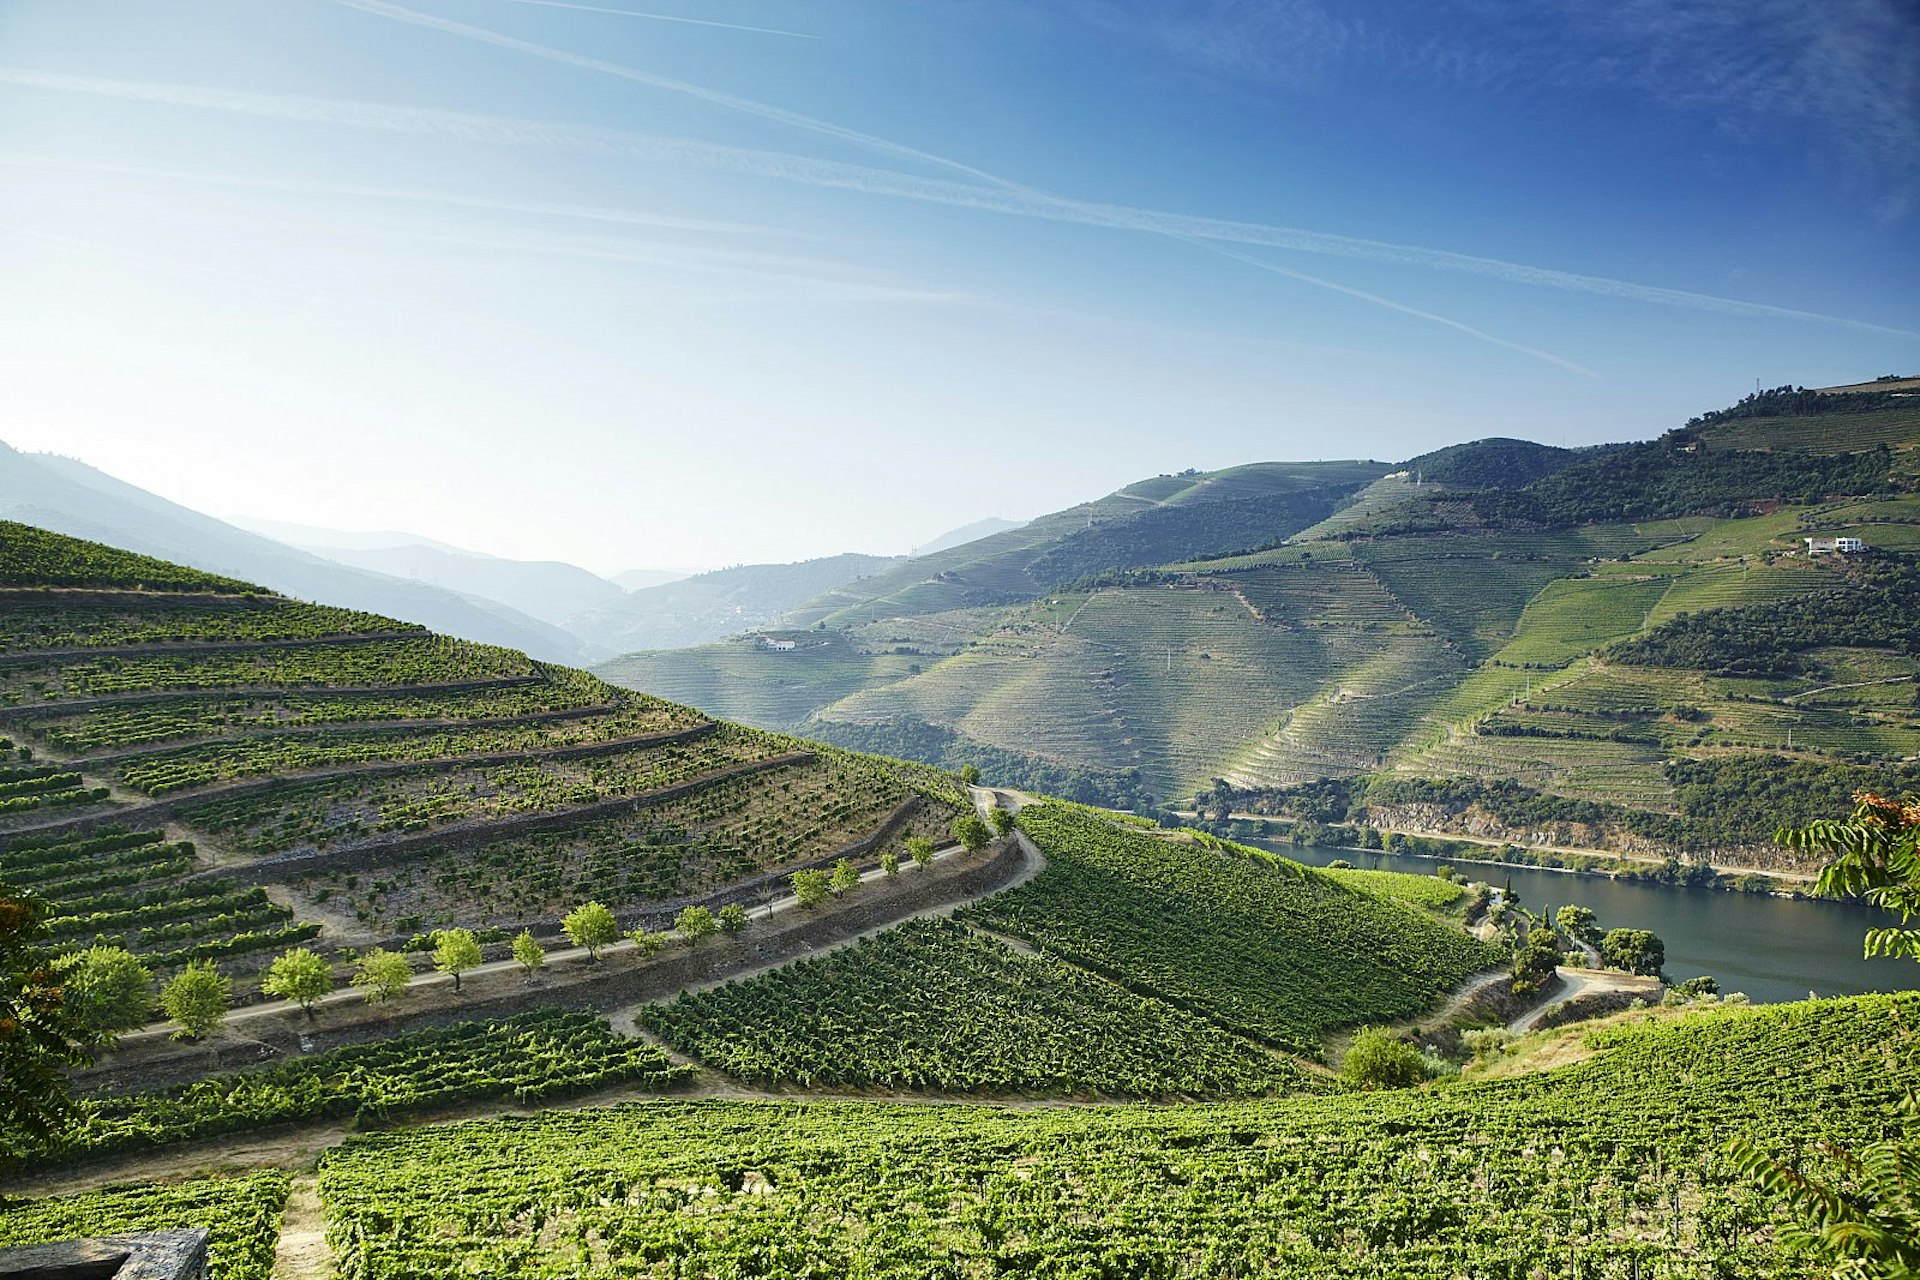 Steeply terraced vineyards rising from the banks of the River Douro in the Douro winemaking region.